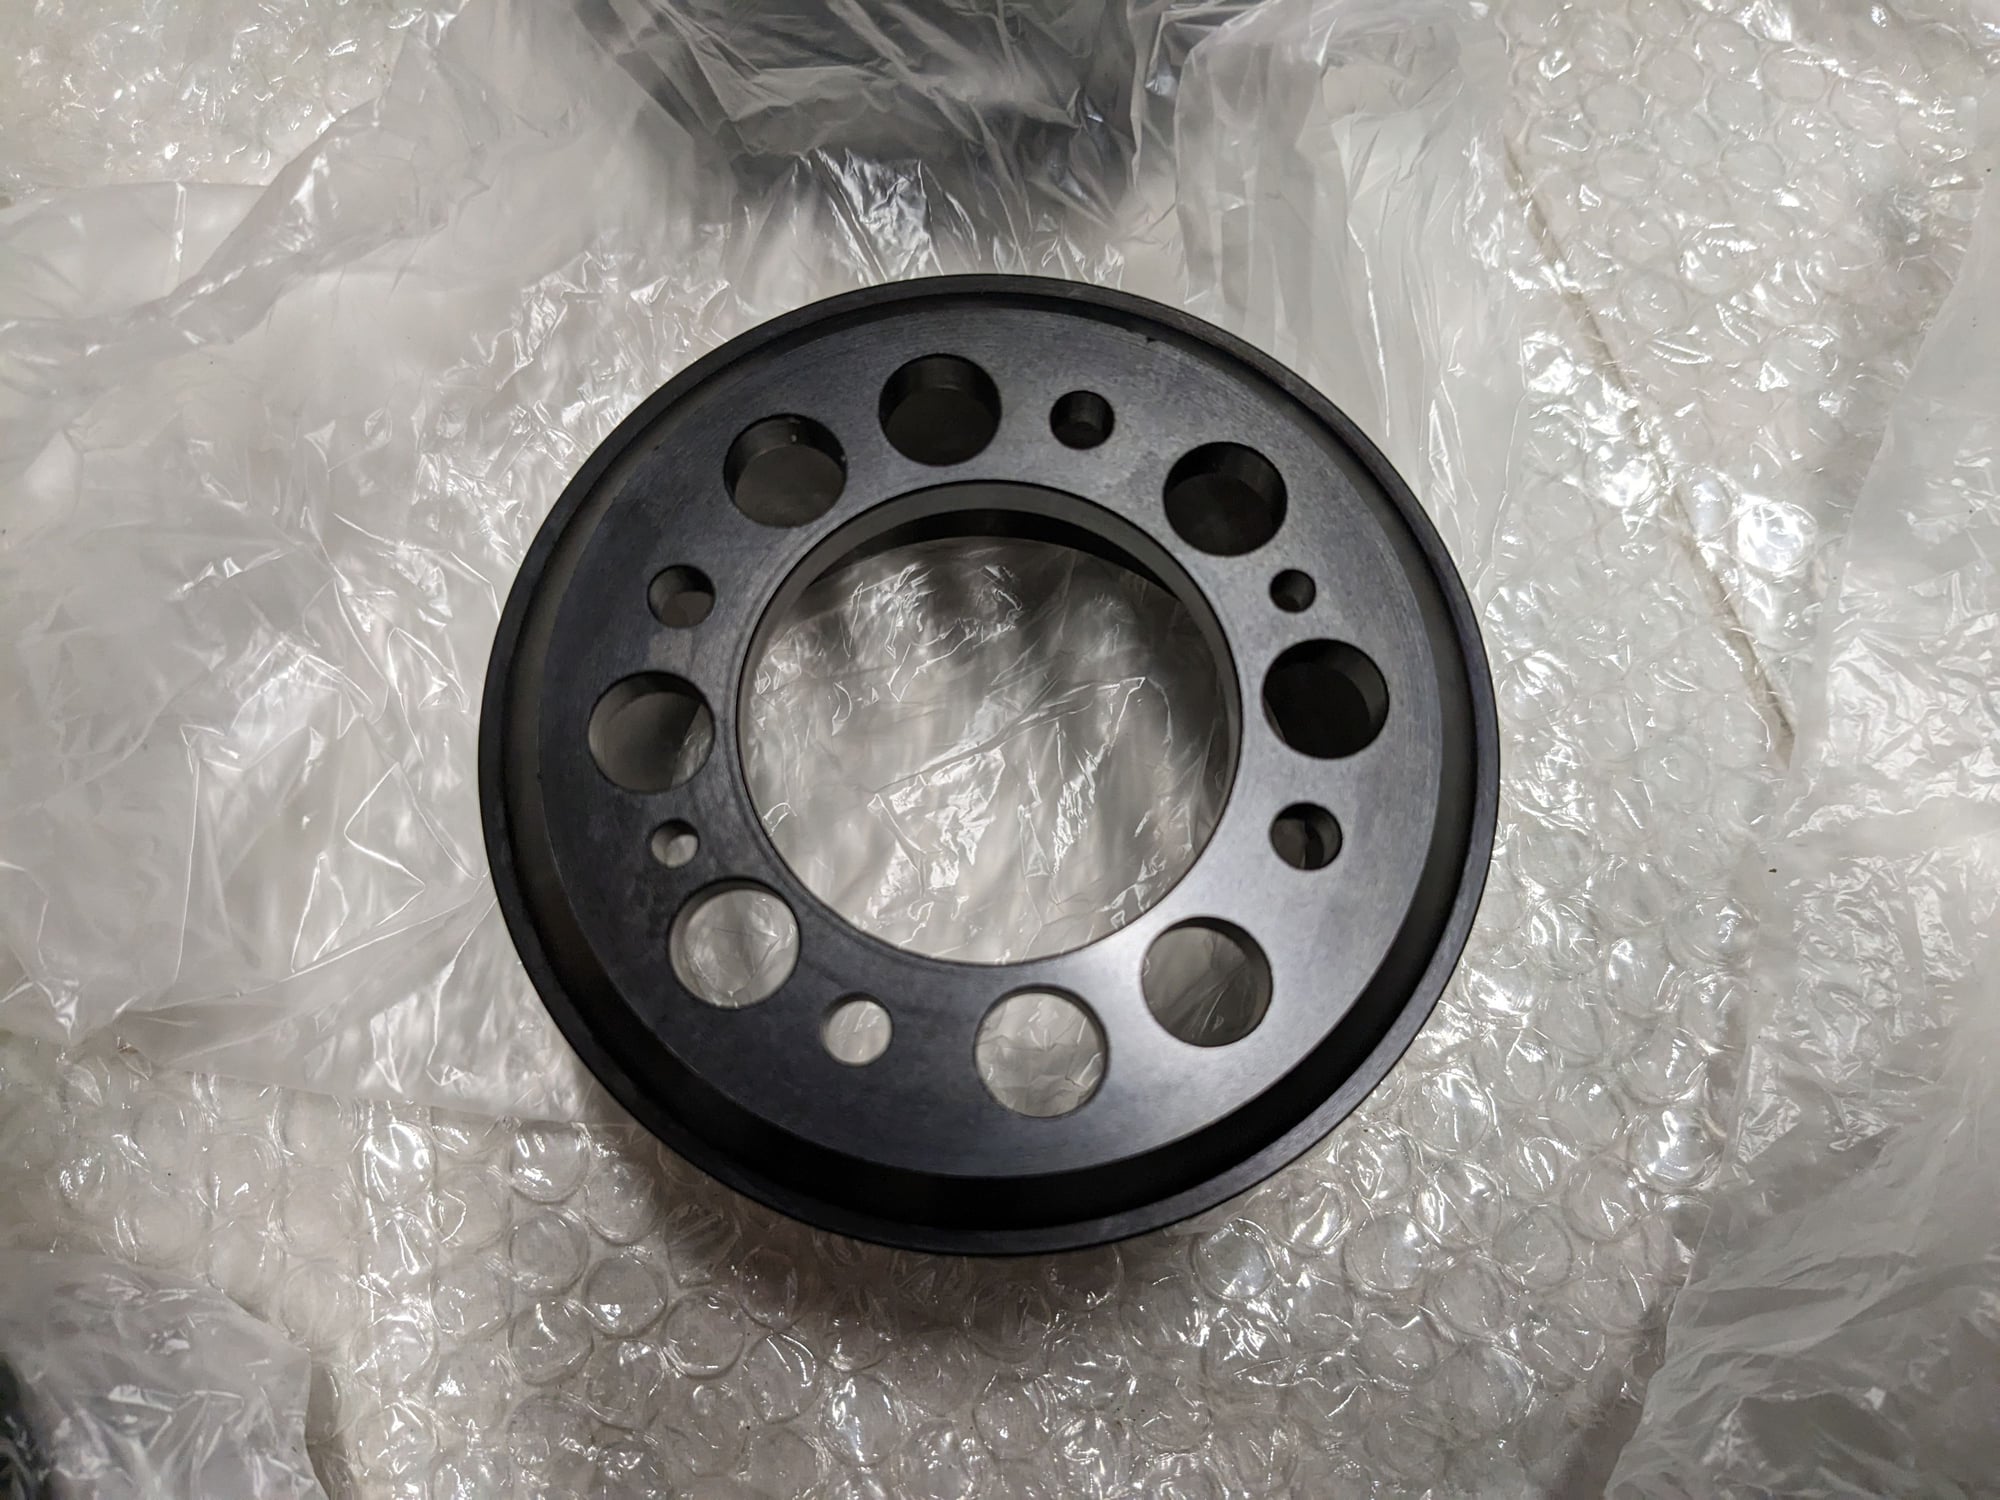 Miscellaneous - Banzai Racing Main Pulley & OEM PS Pulley - New - 1993 to 2002 Mazda RX-7 - Brooklyn, NY 11204, United States